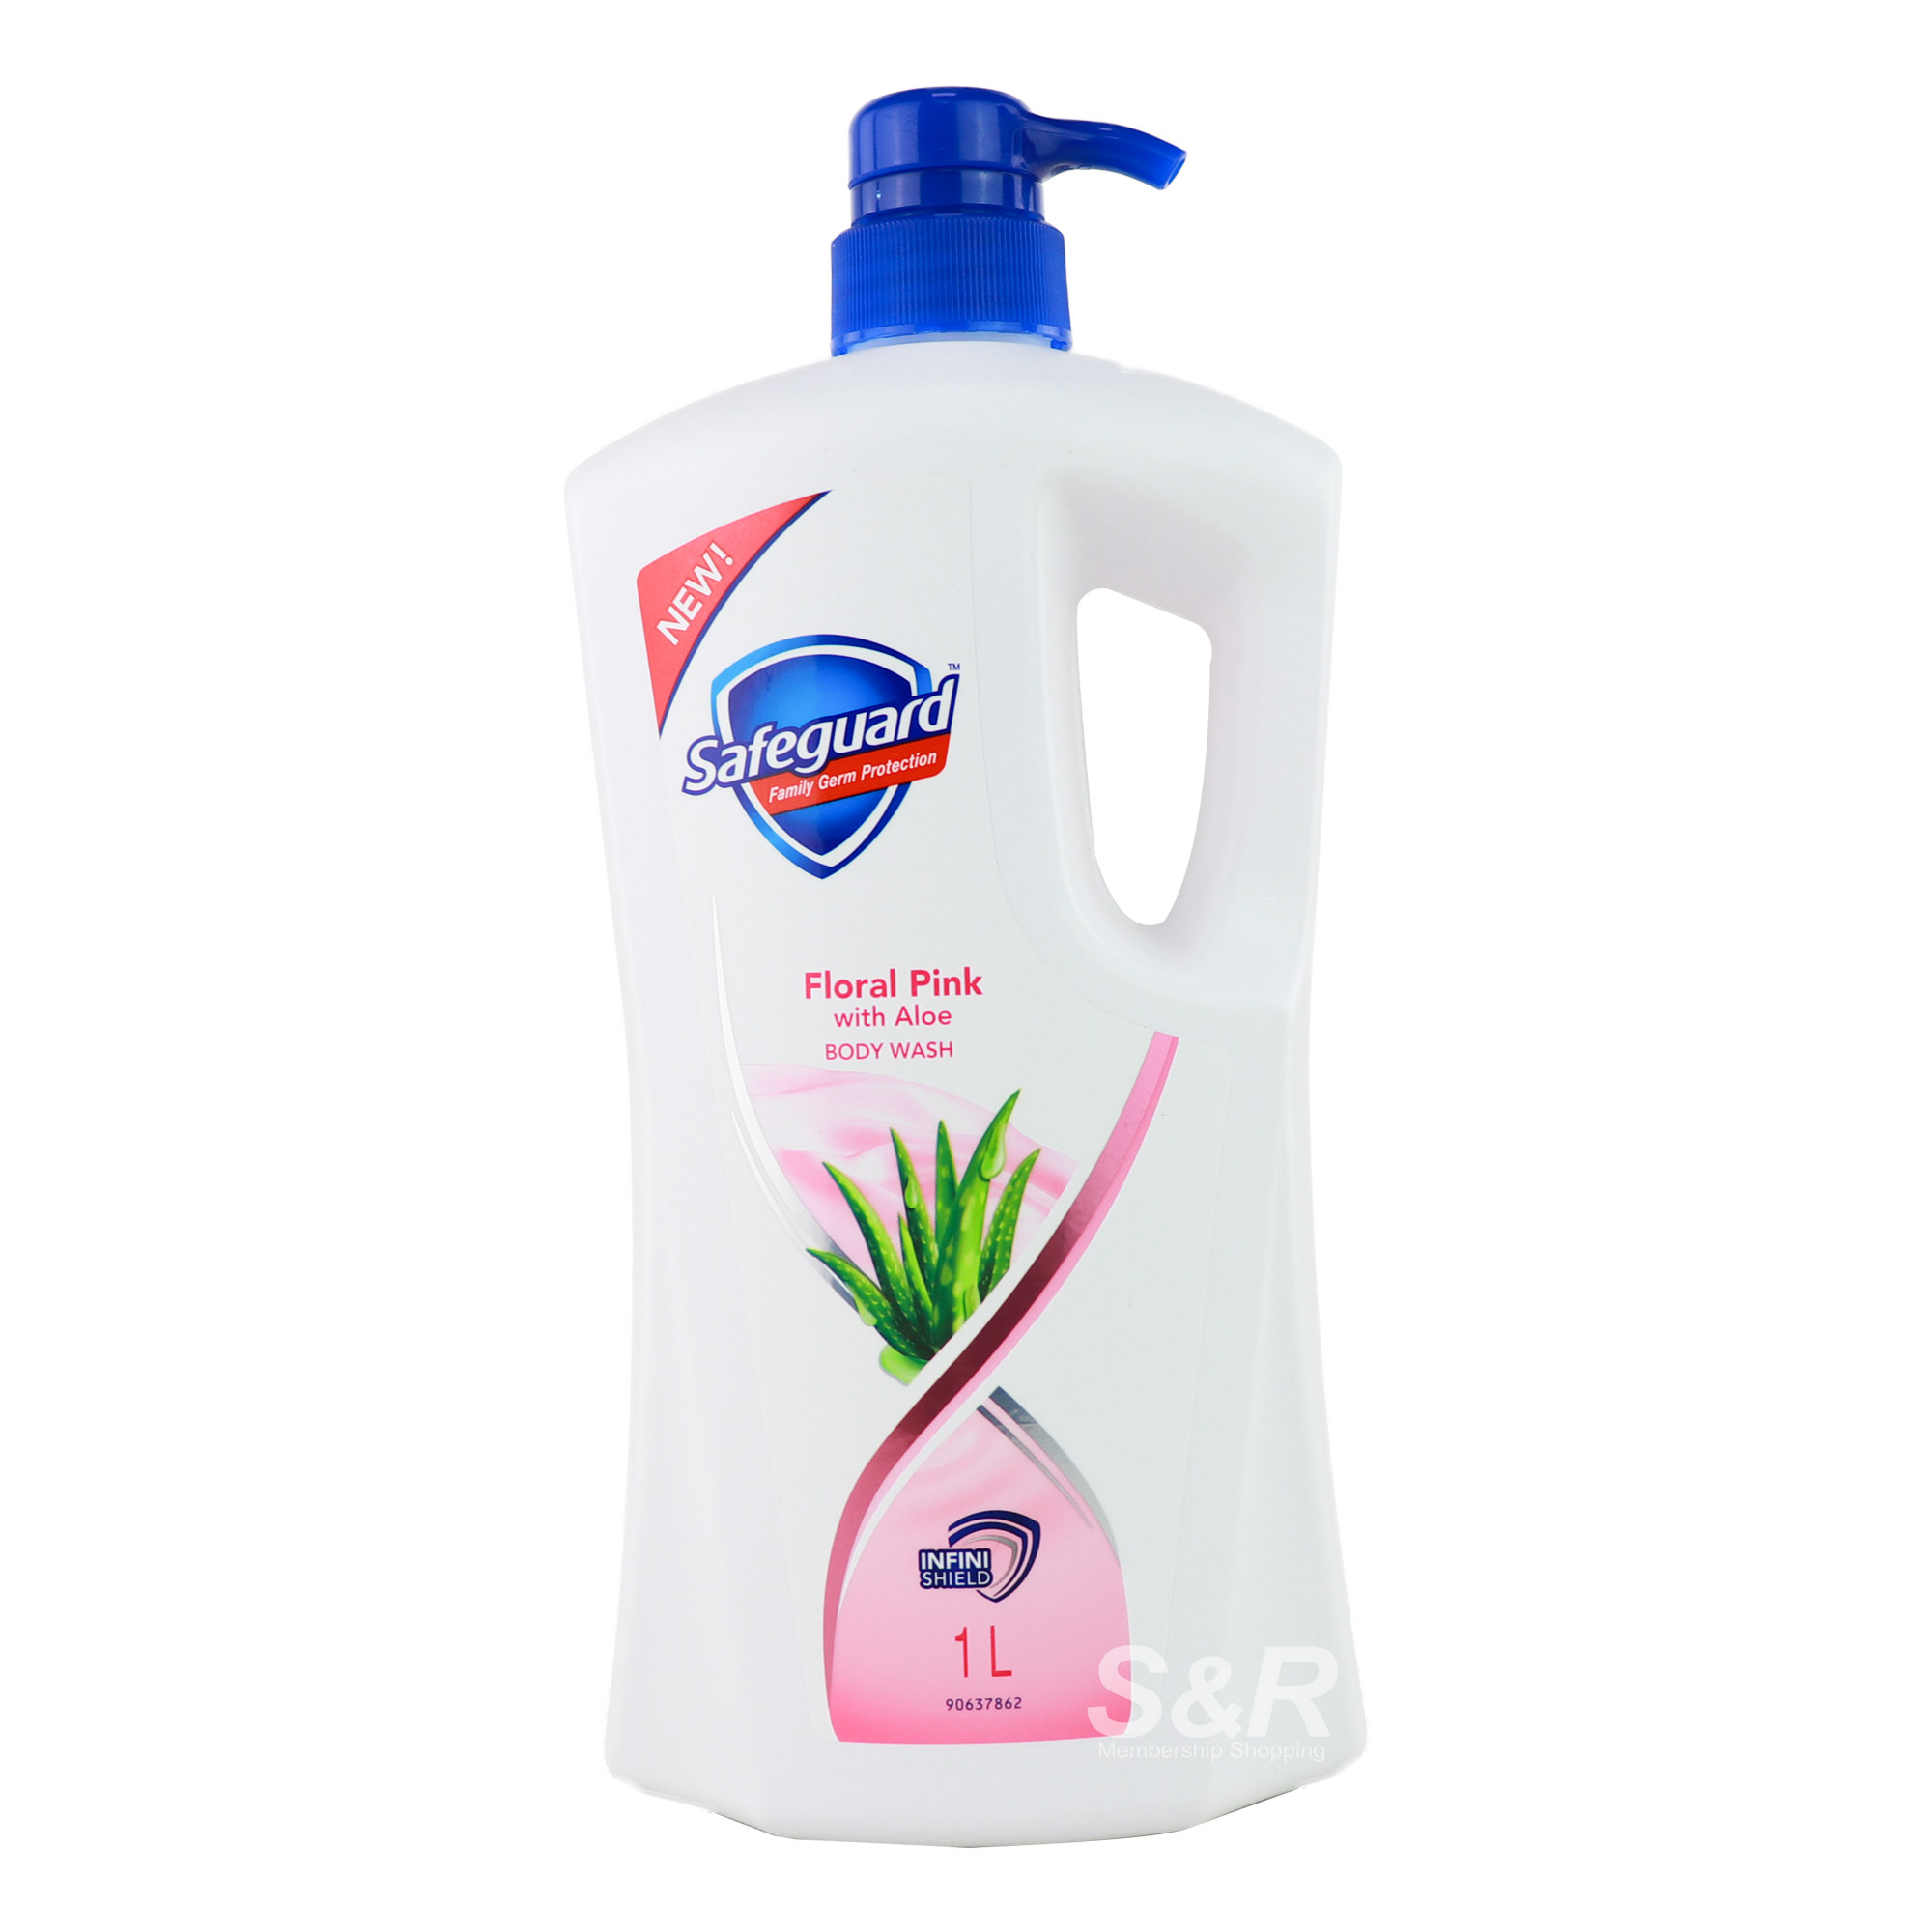 Safeguard Floral Pink with Aloe Body Wash 1L